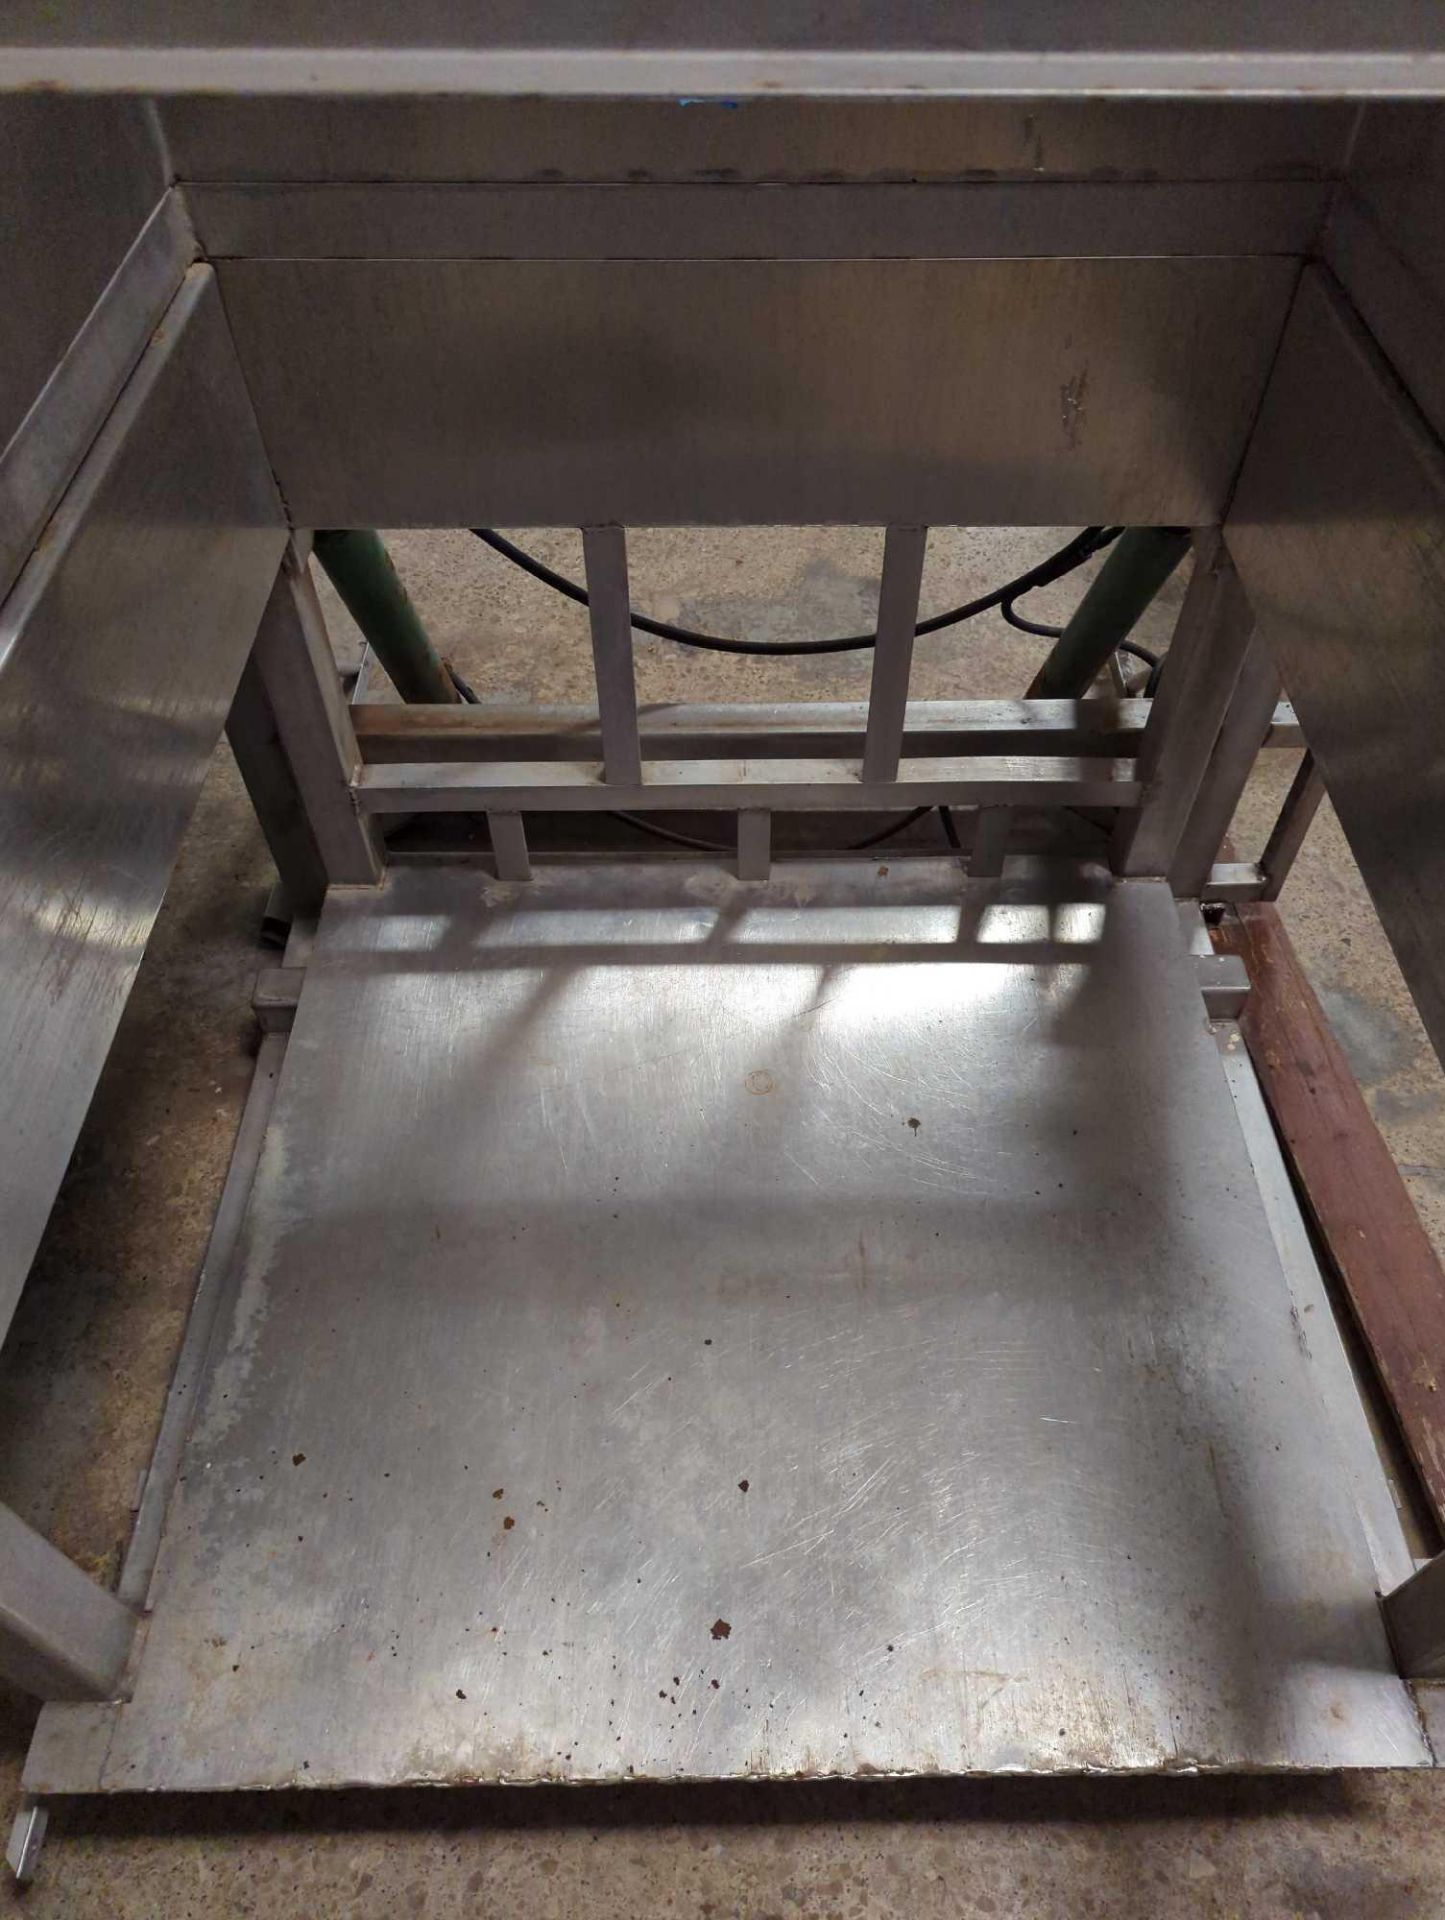 Stainless Steel Hydraulic Tote Flipper - Image 7 of 15